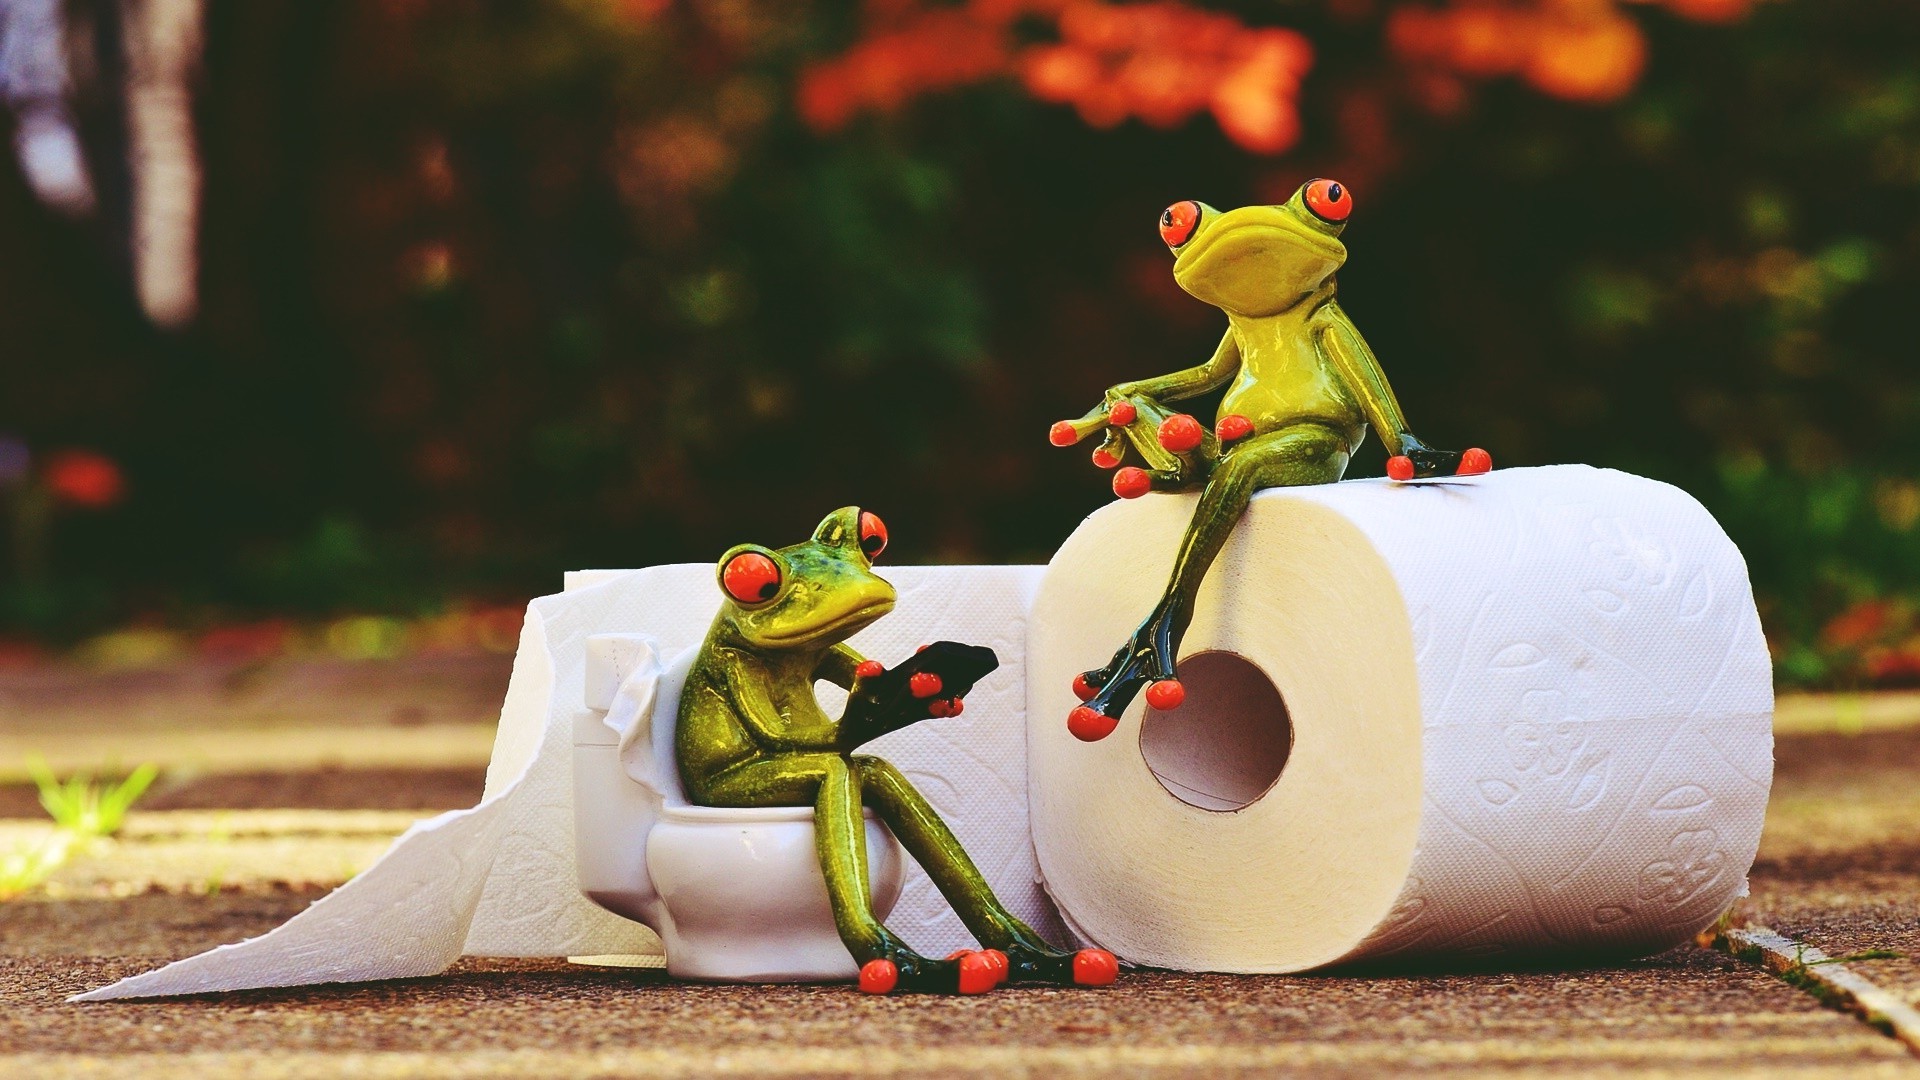 Retro style, Frog, Toilet paper, Animals, Situation, Vintage Wallpaper